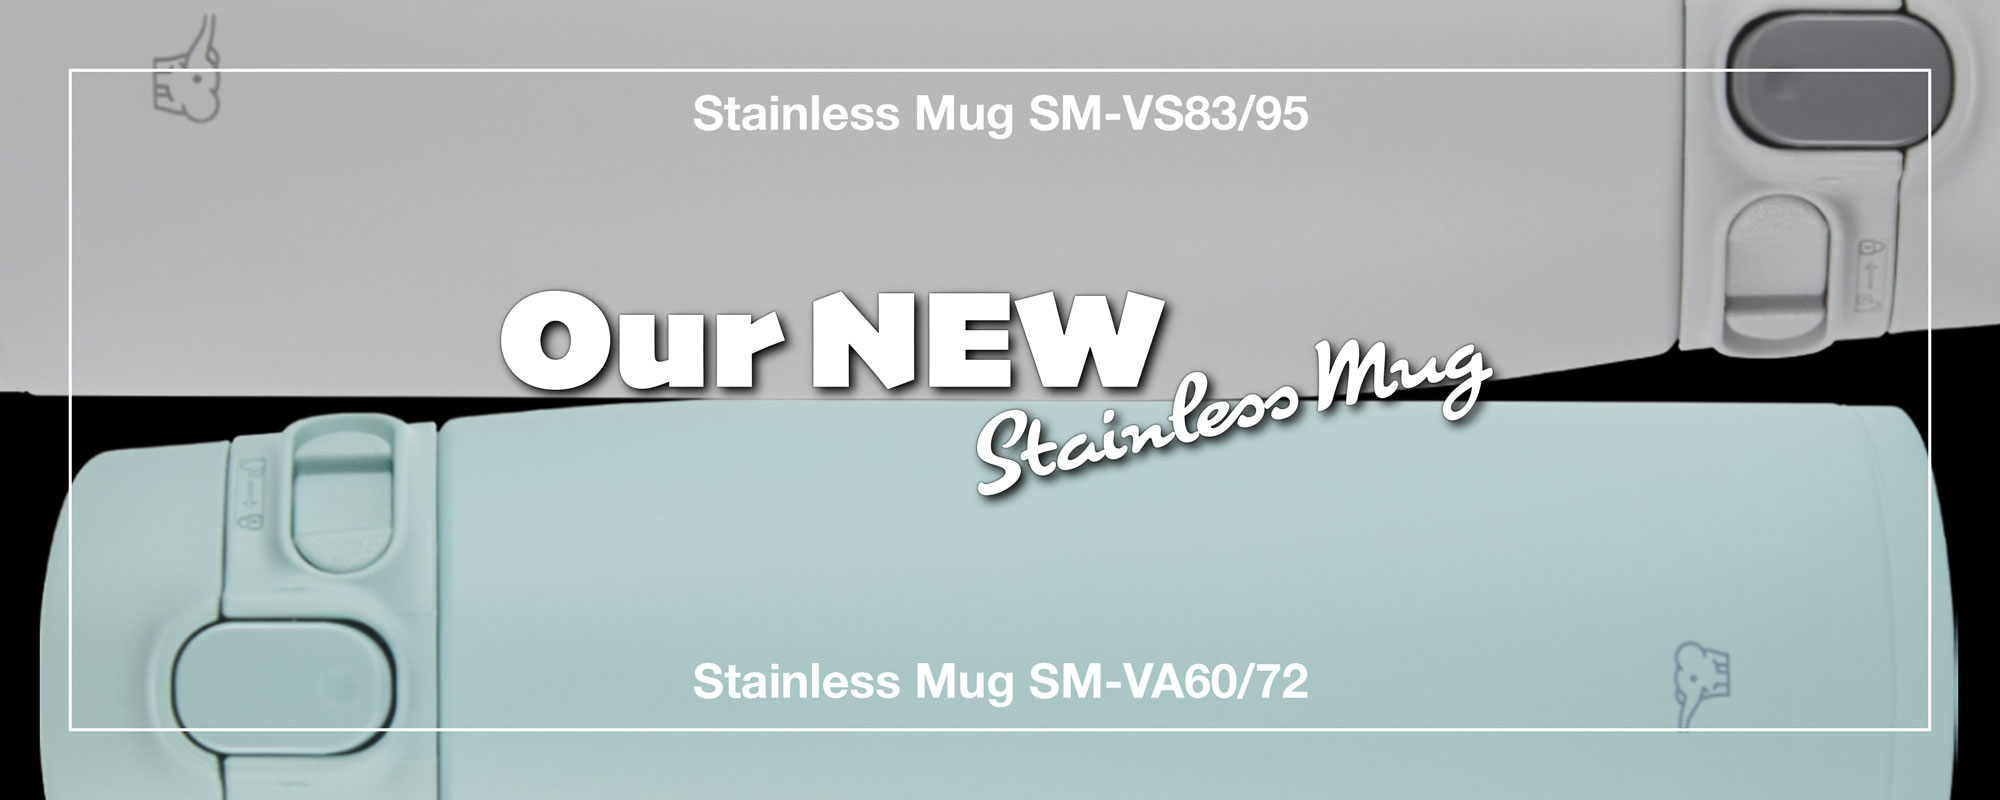 Our NEW Stainless Mug